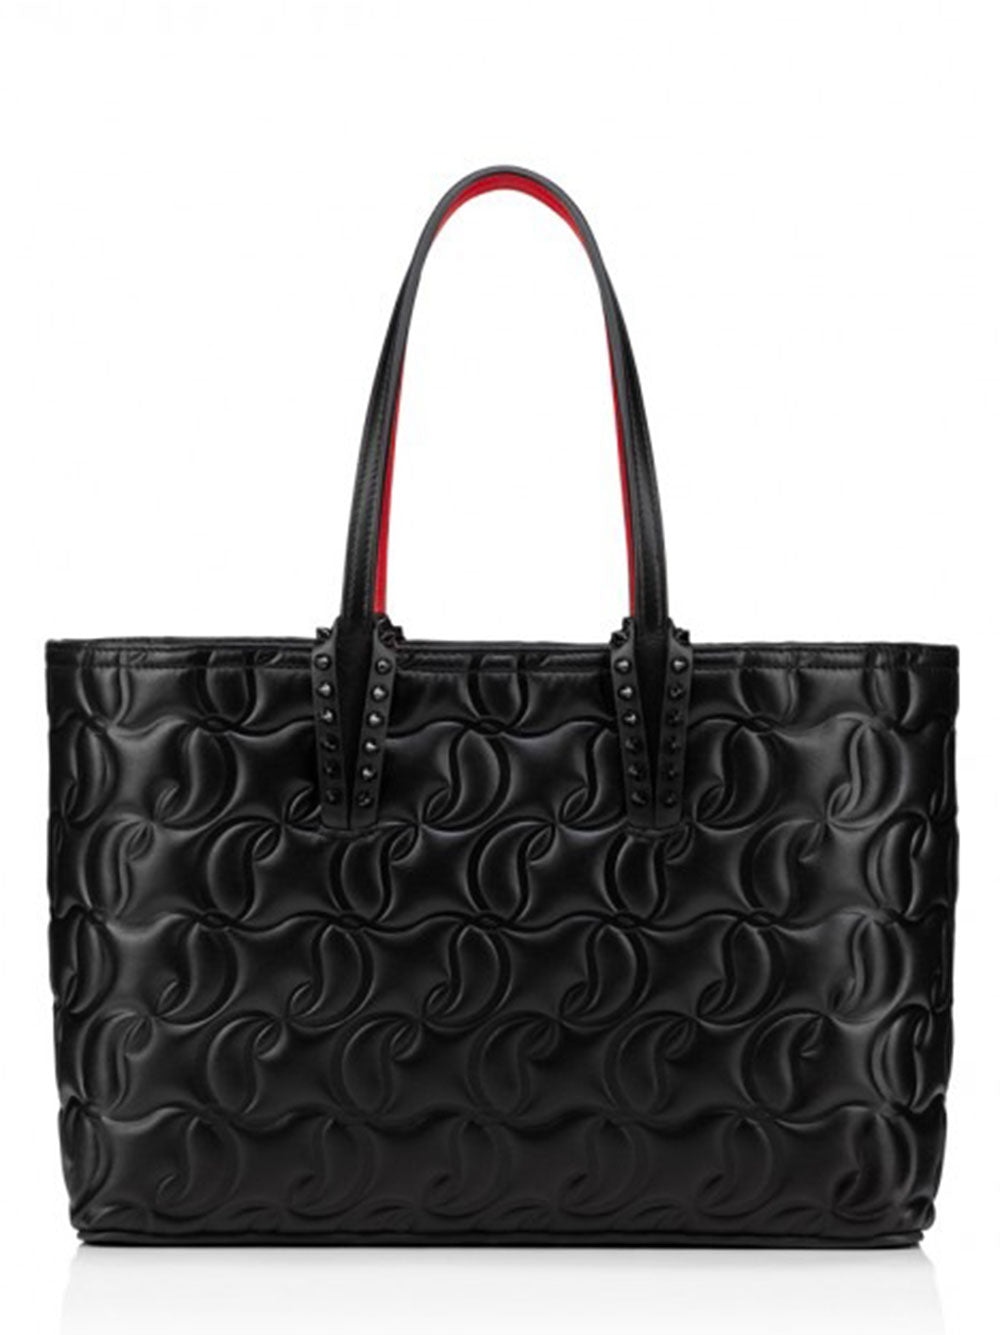 Christian Louboutin Cabata Small Nappa Tote Bag (More Colors) | In-Store Only